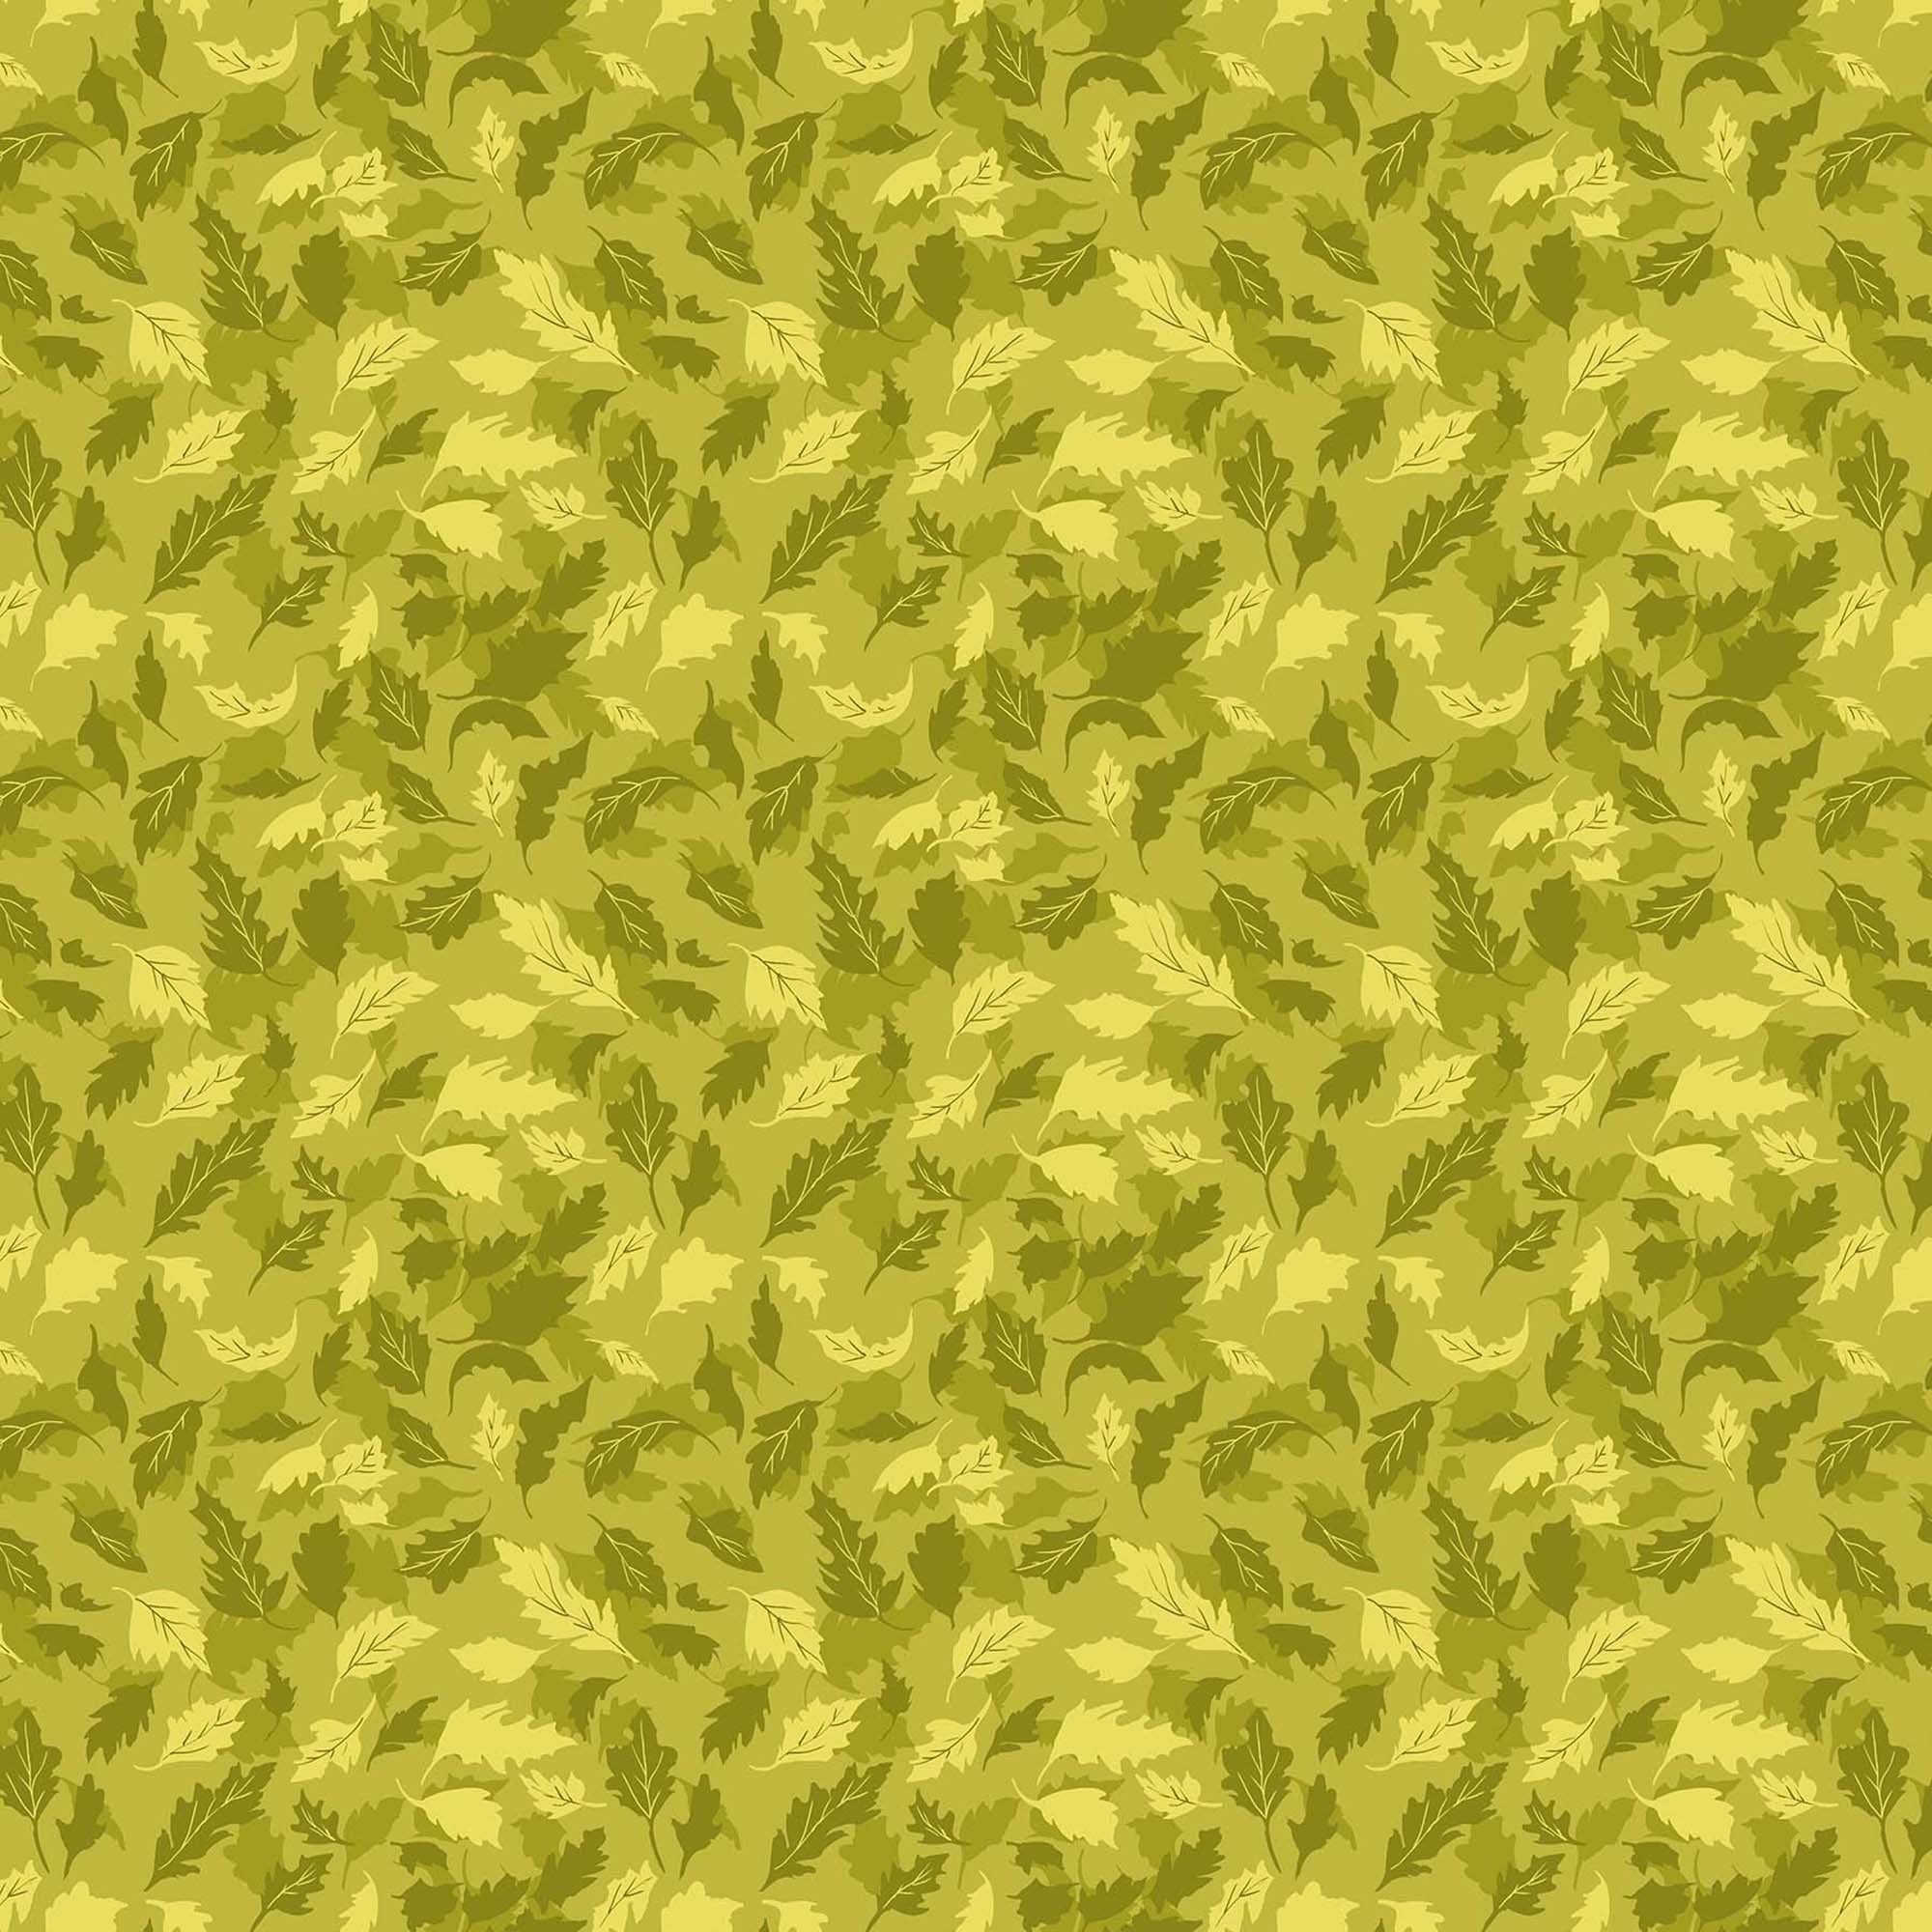 Summer's End - Leaves Evergreen Fabric